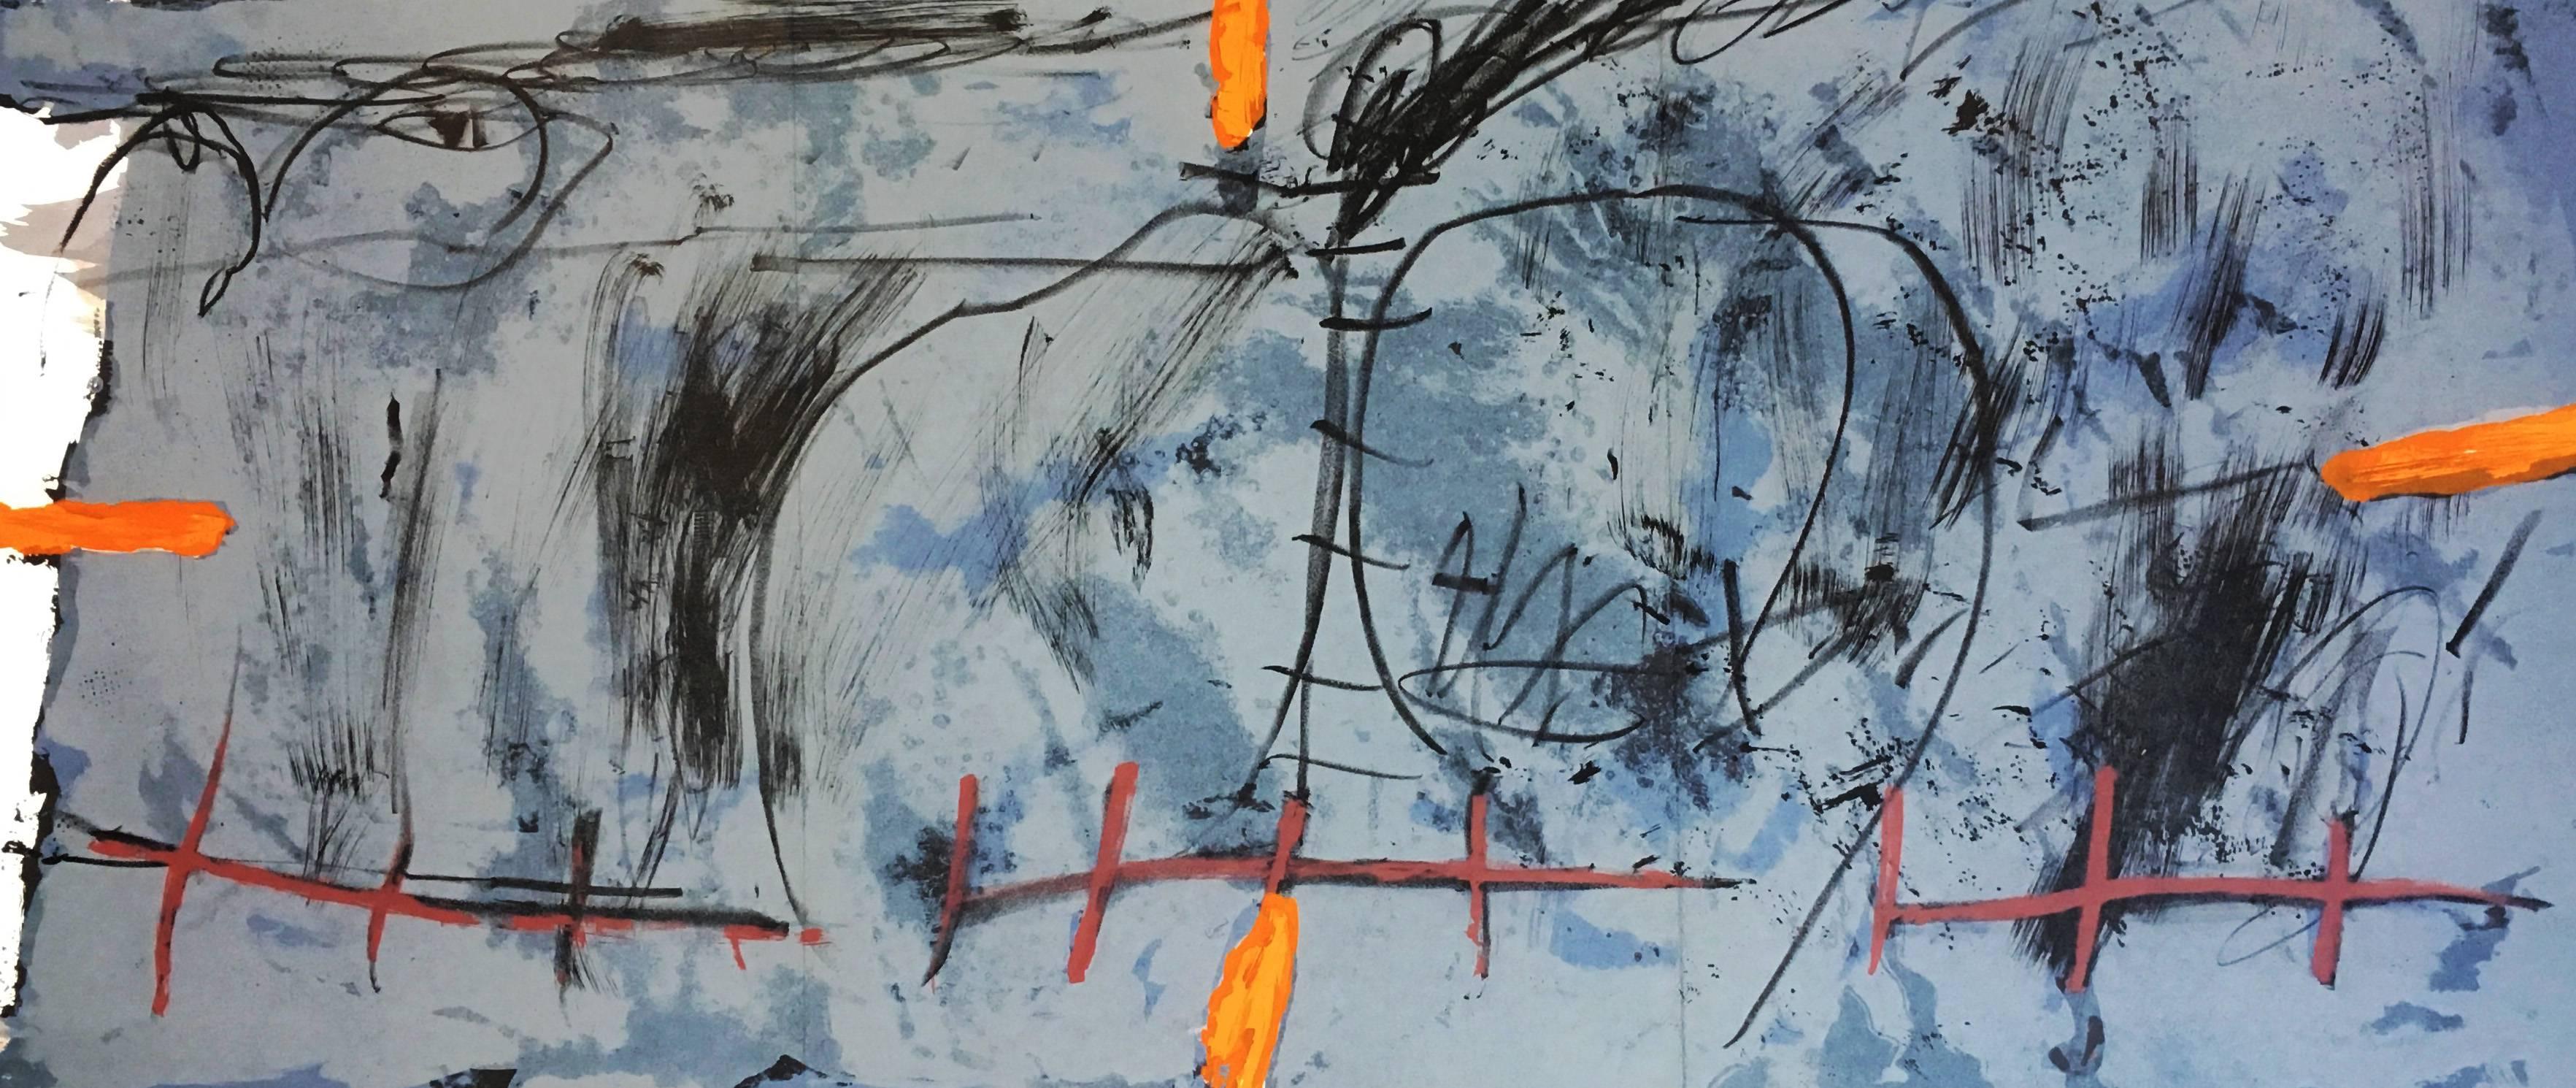 Antoni Tàpies Lithograph c. 1967 from Derrière le miroir: 

Lithograph in colors; 15 x 33 inches. 
Very good overall vintage condition; contains center fold-lines as originally issued; well preserved. 

Unsigned from an edition of unknown. From: